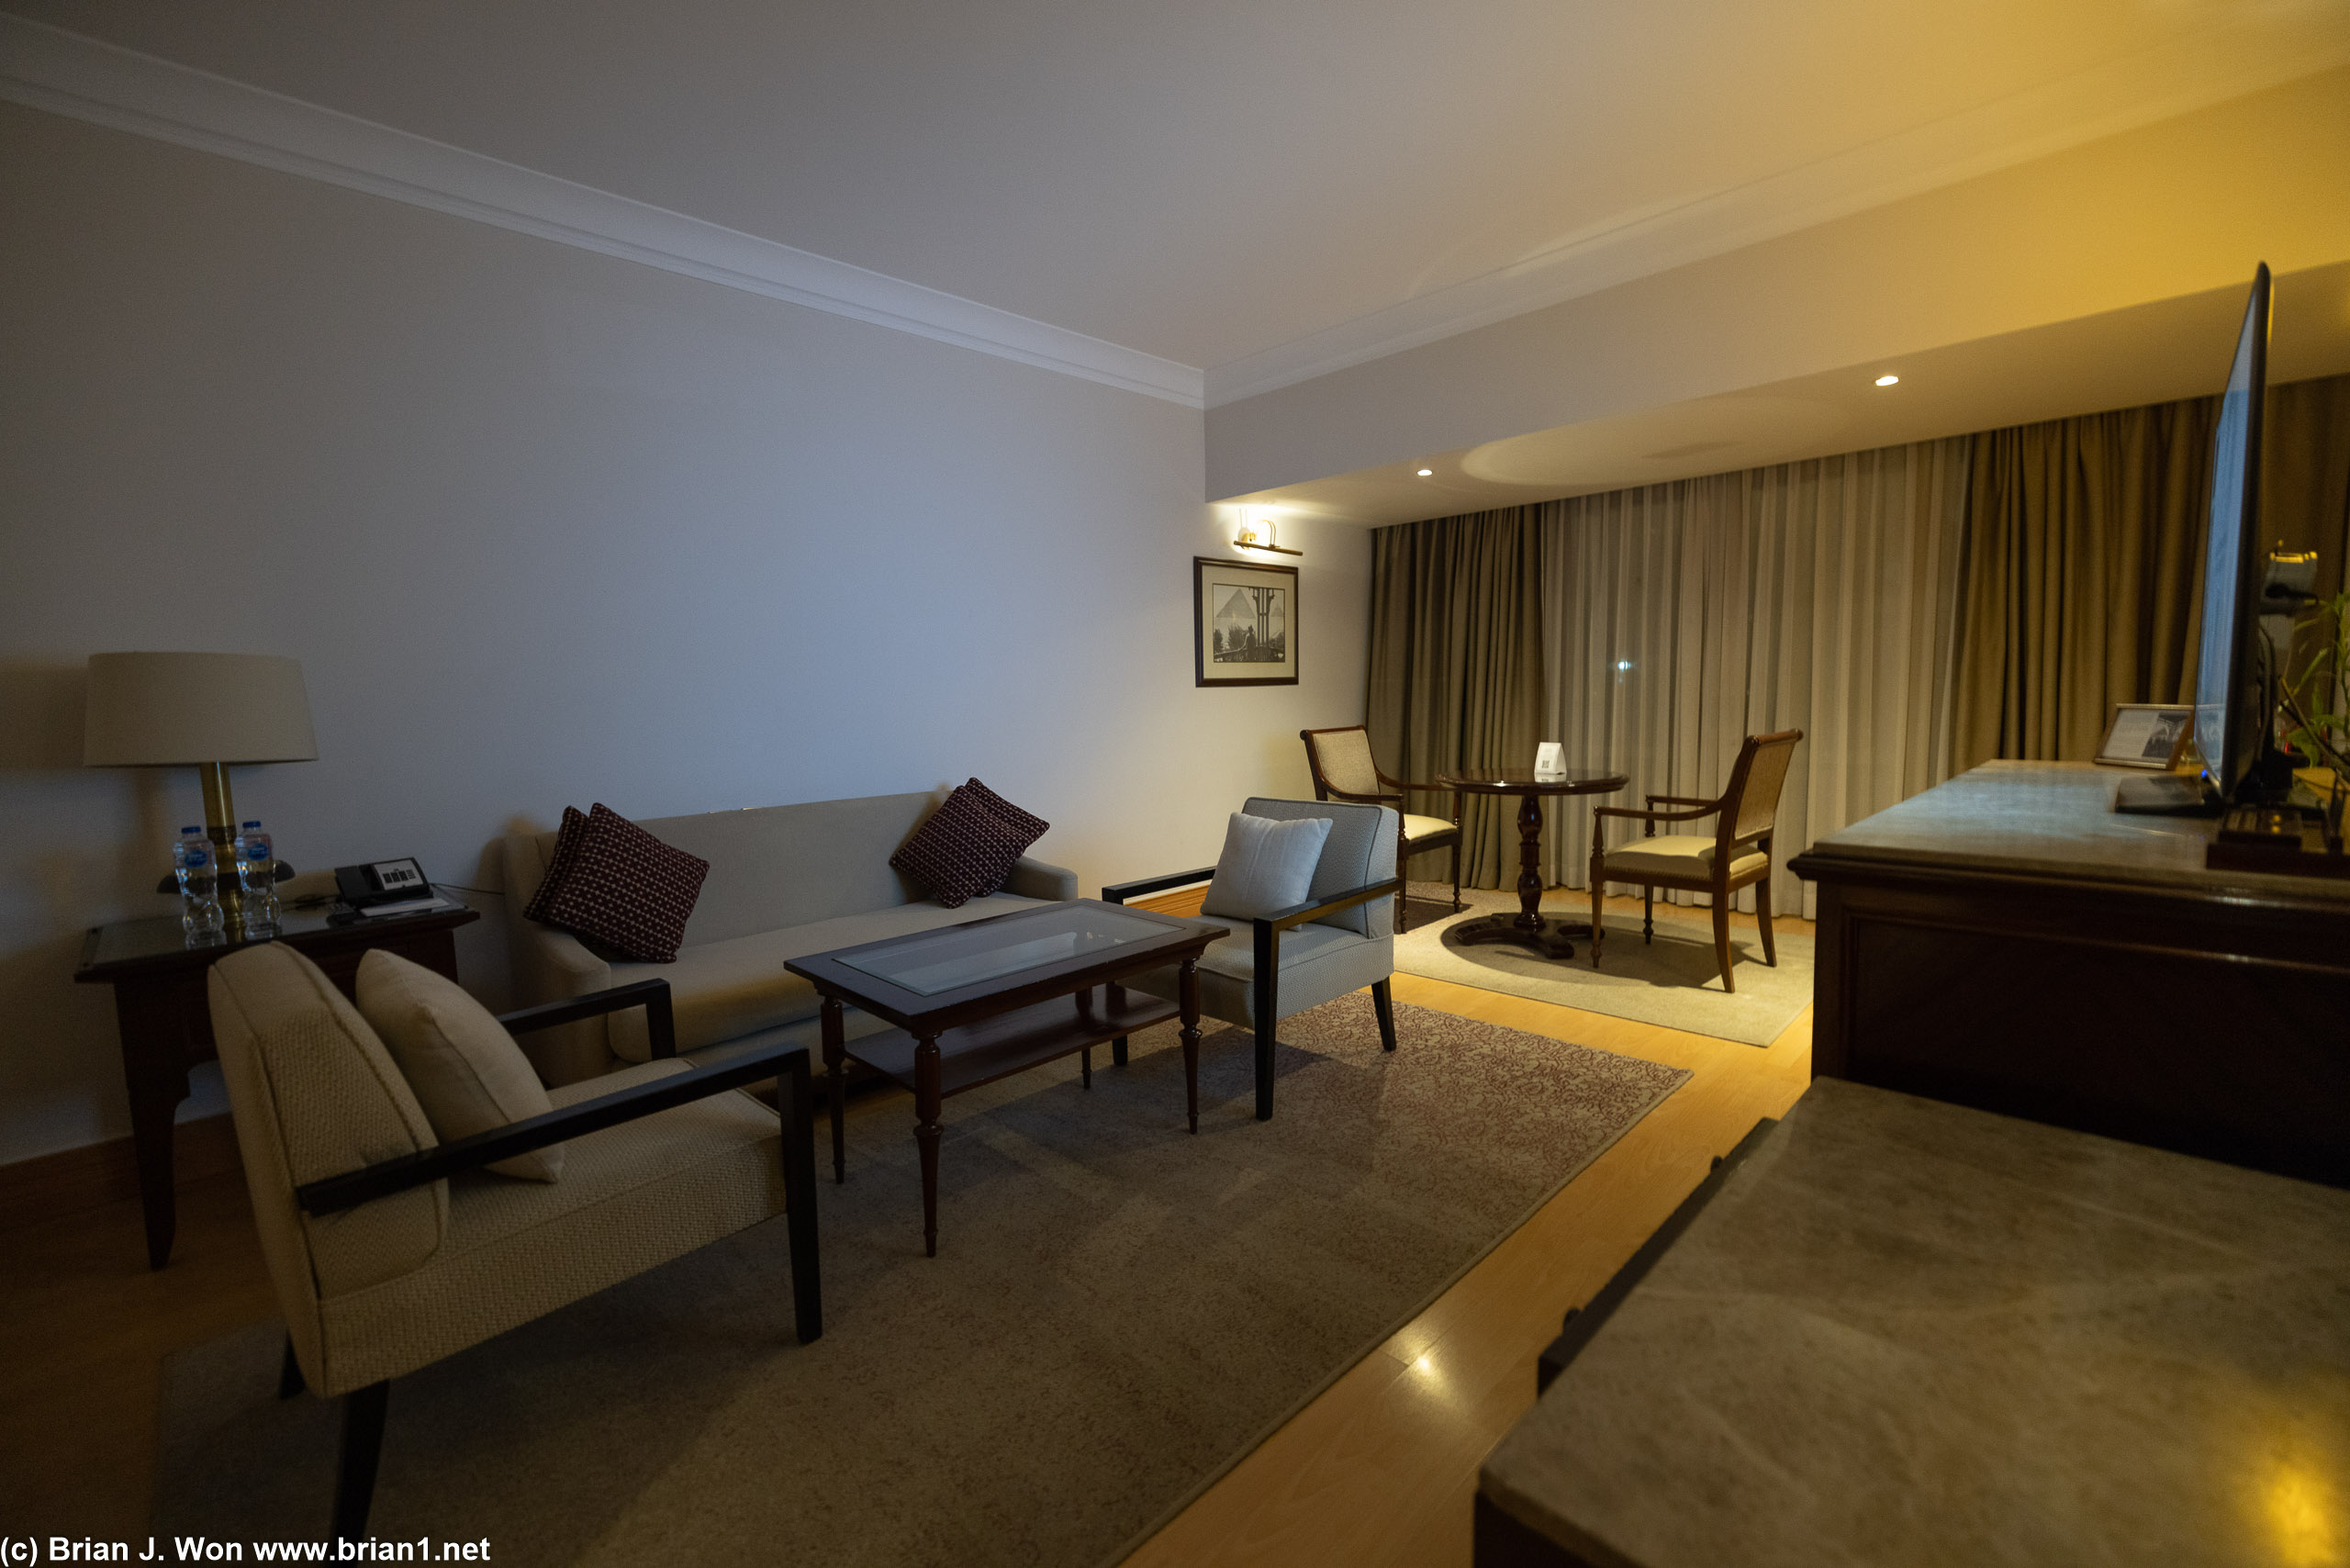 The "suite" is identical in size and layout to the bedroom, but with a couch and chairs instead of a bed.